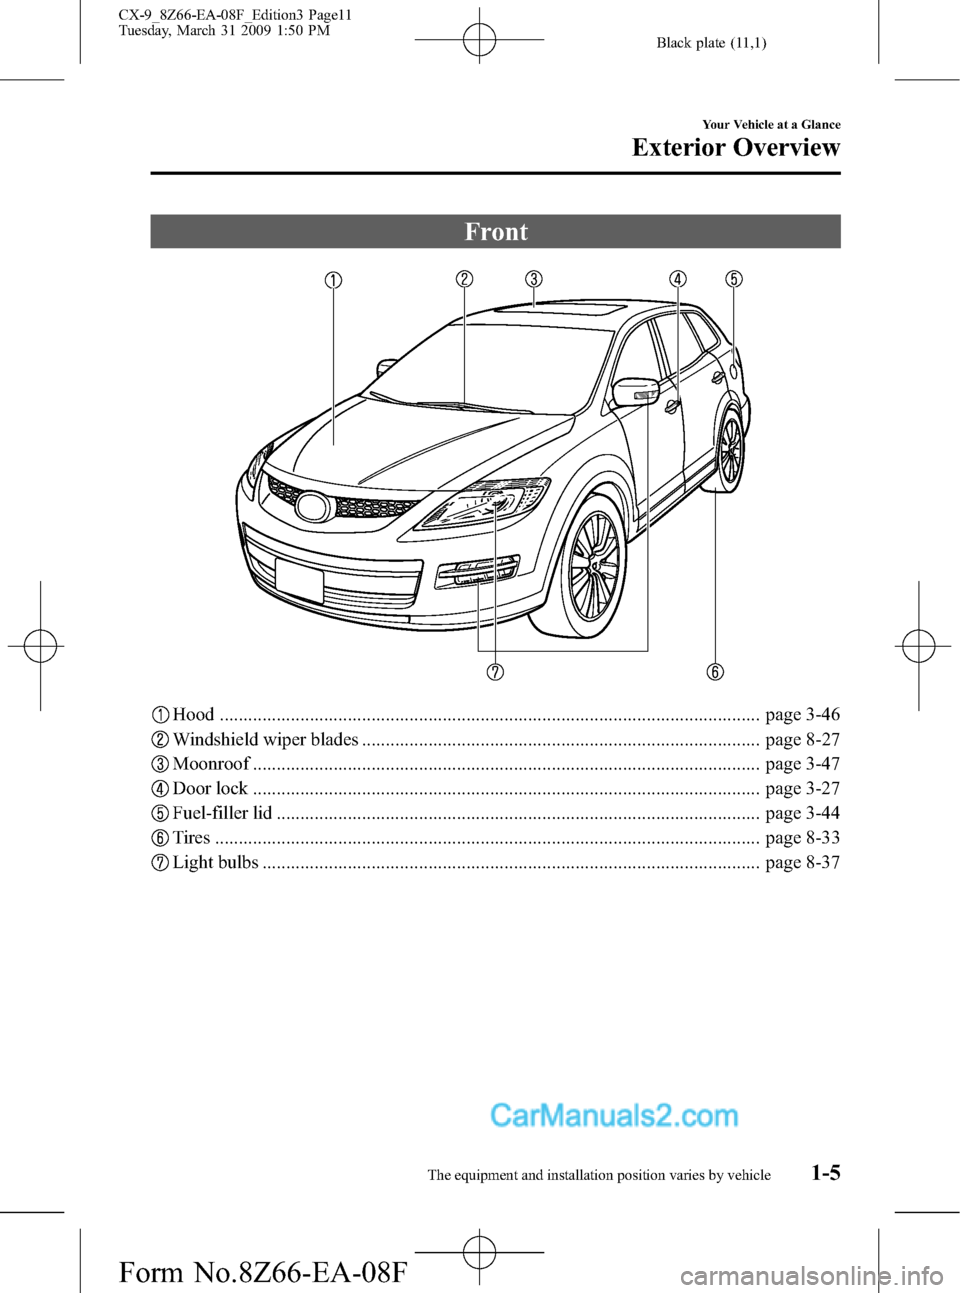 MAZDA MODEL CX-9 2009  Owners Manual (in English) Black plate (11,1)
Front
Hood .................................................................................................................. page 3-46
Windshield wiper blades .....................